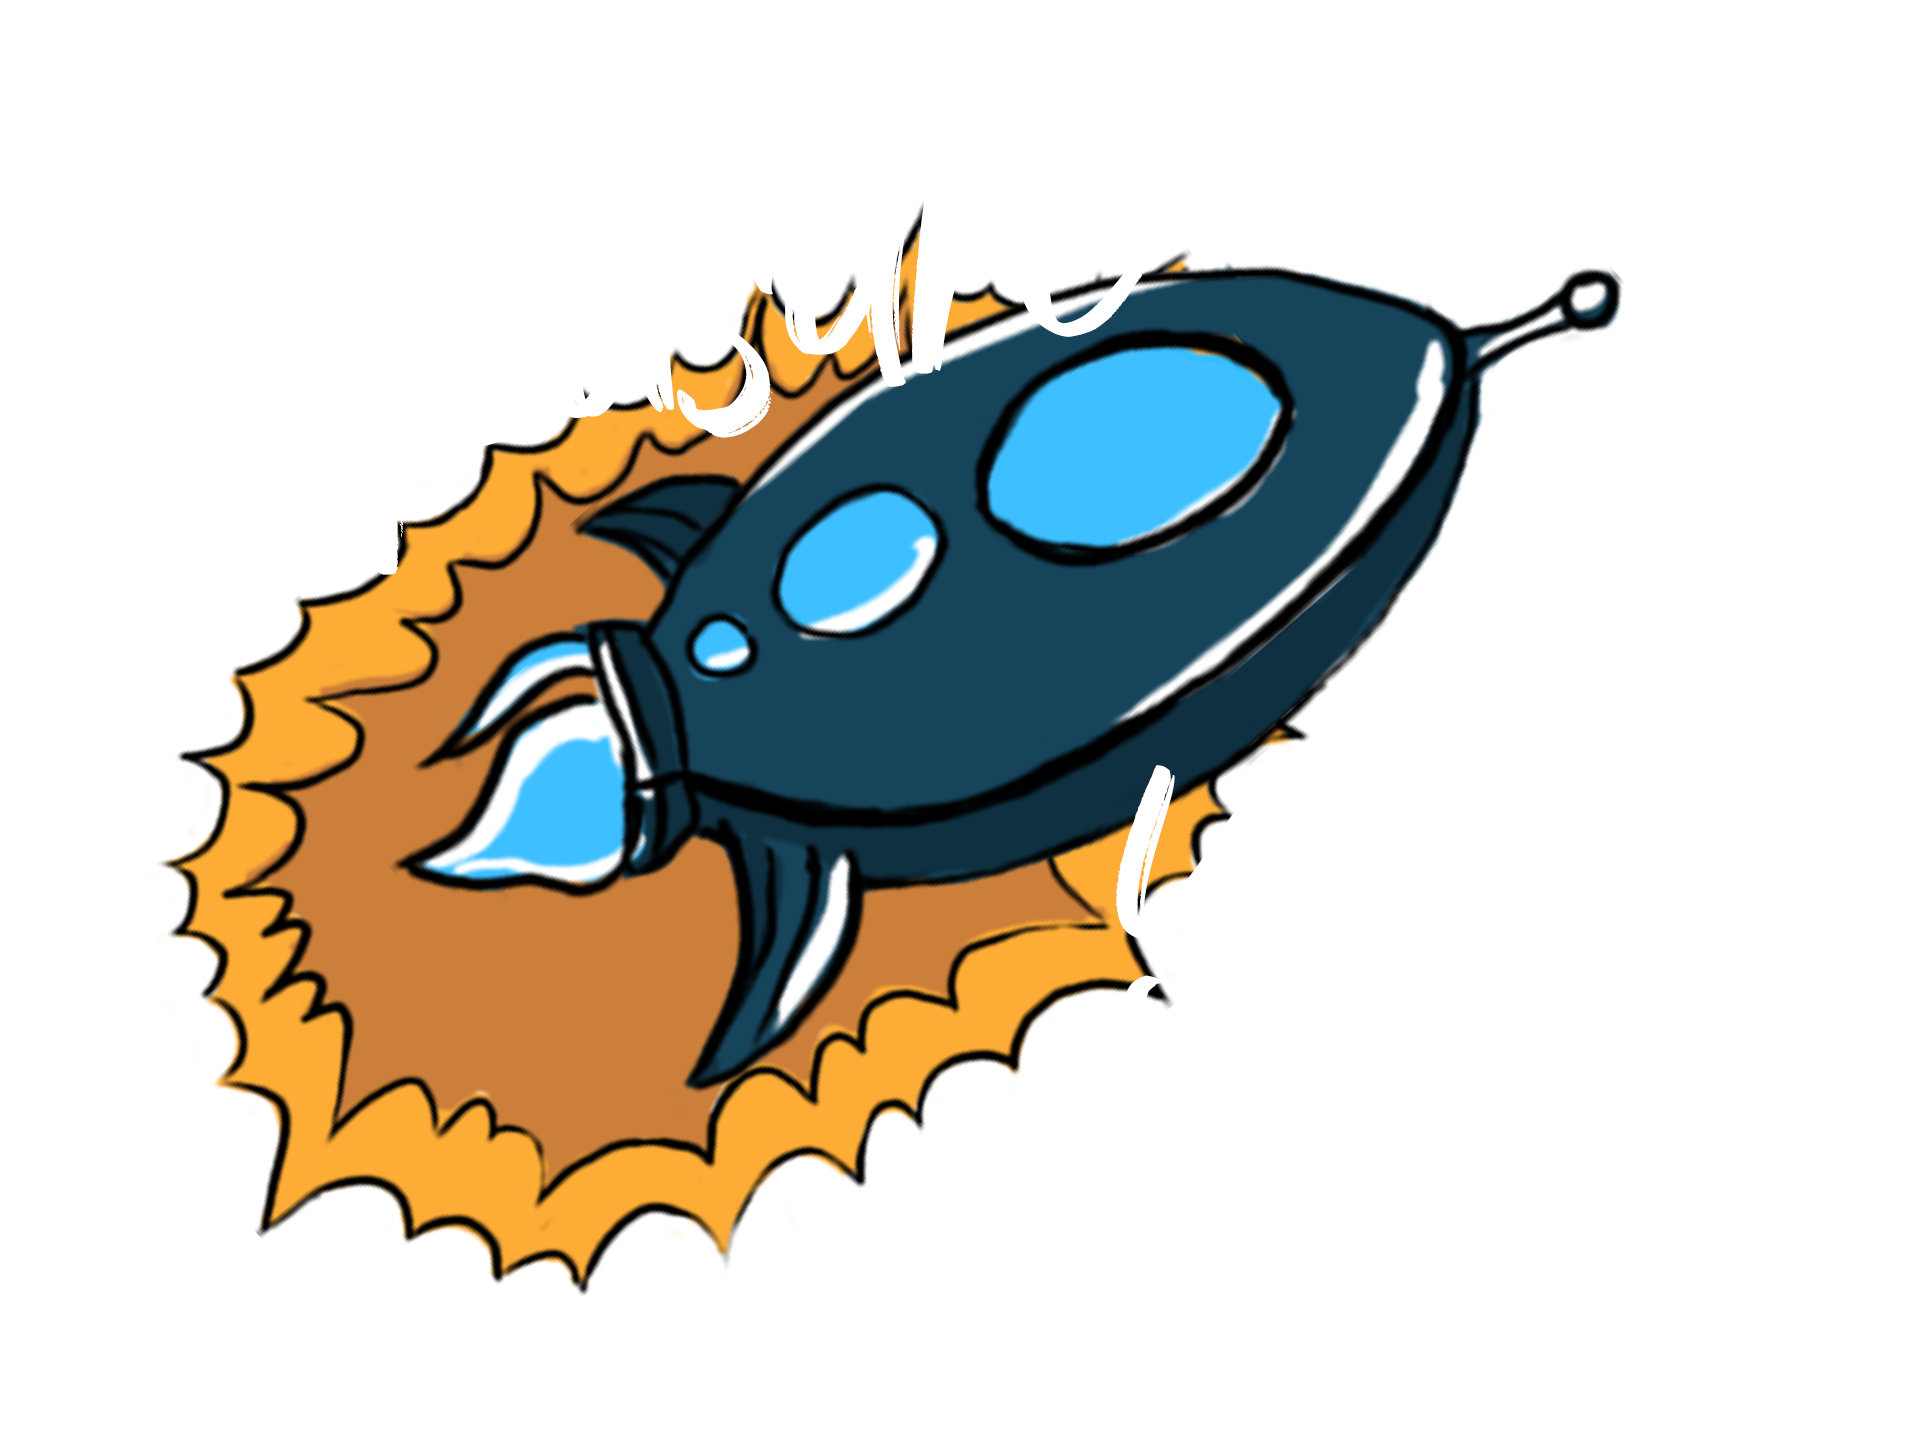 Measure your marketing results